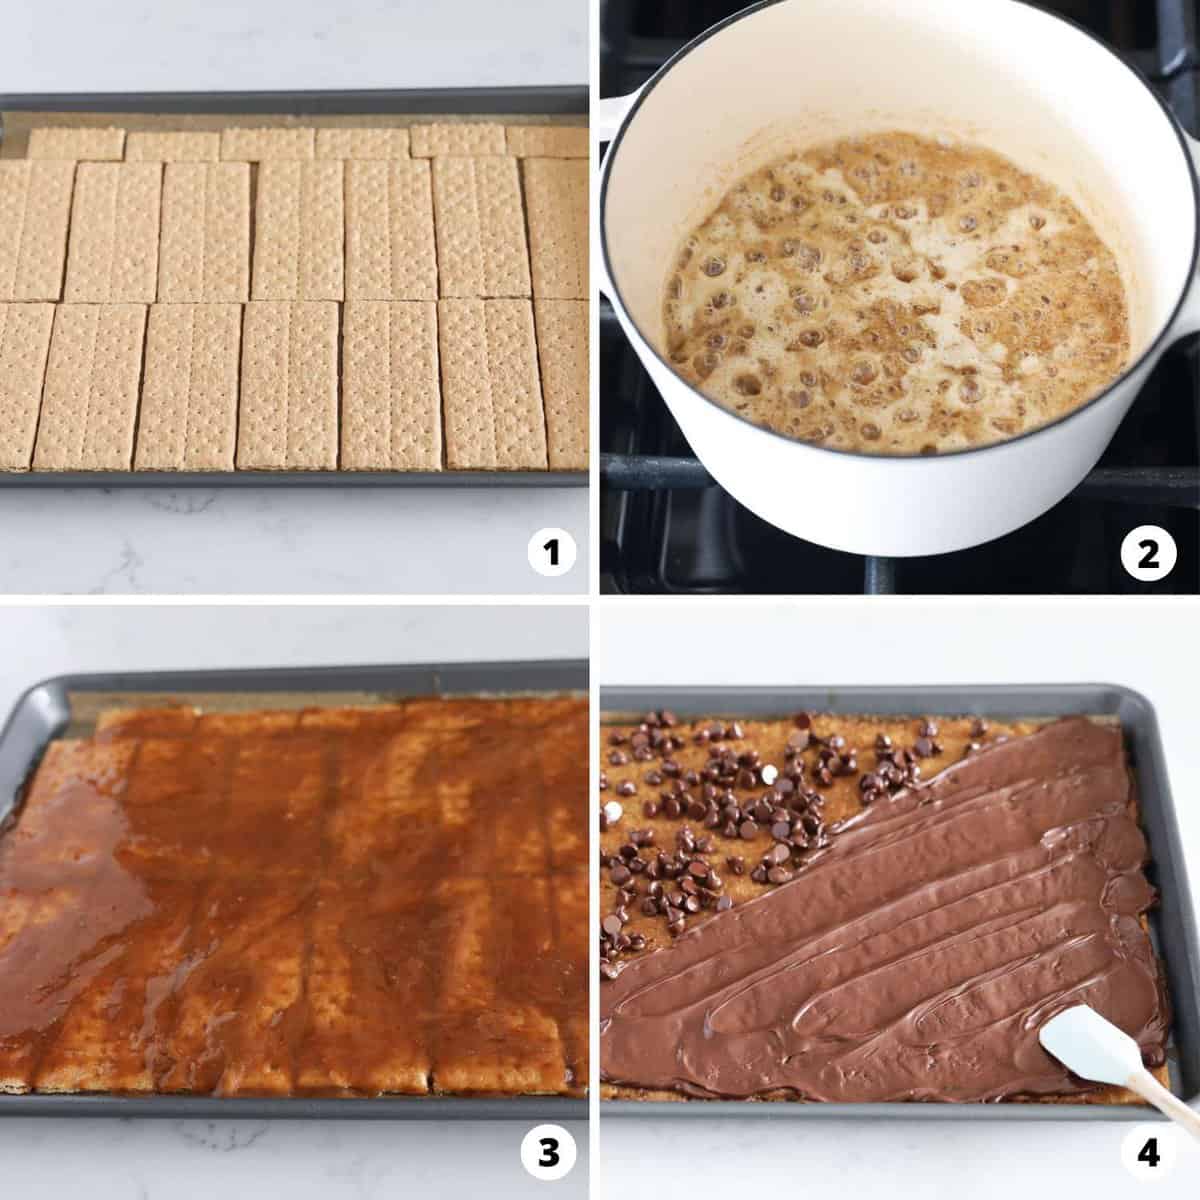 Showing how to make graham cracker toffee in a 4 step collage.